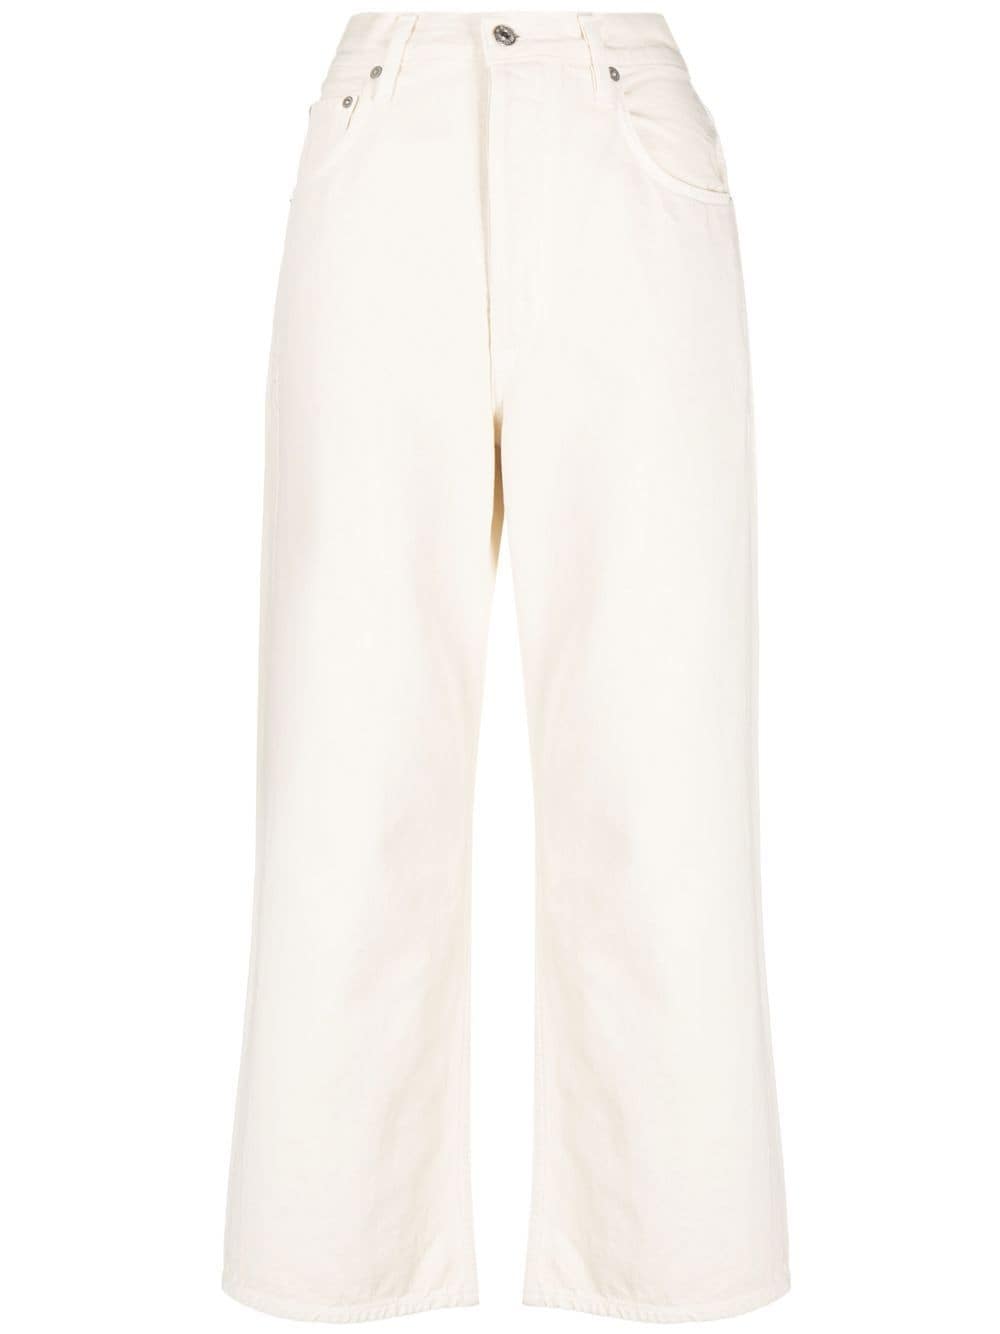 Citizens of Humanity Weite Gaucho Jeans - Nude von Citizens of Humanity